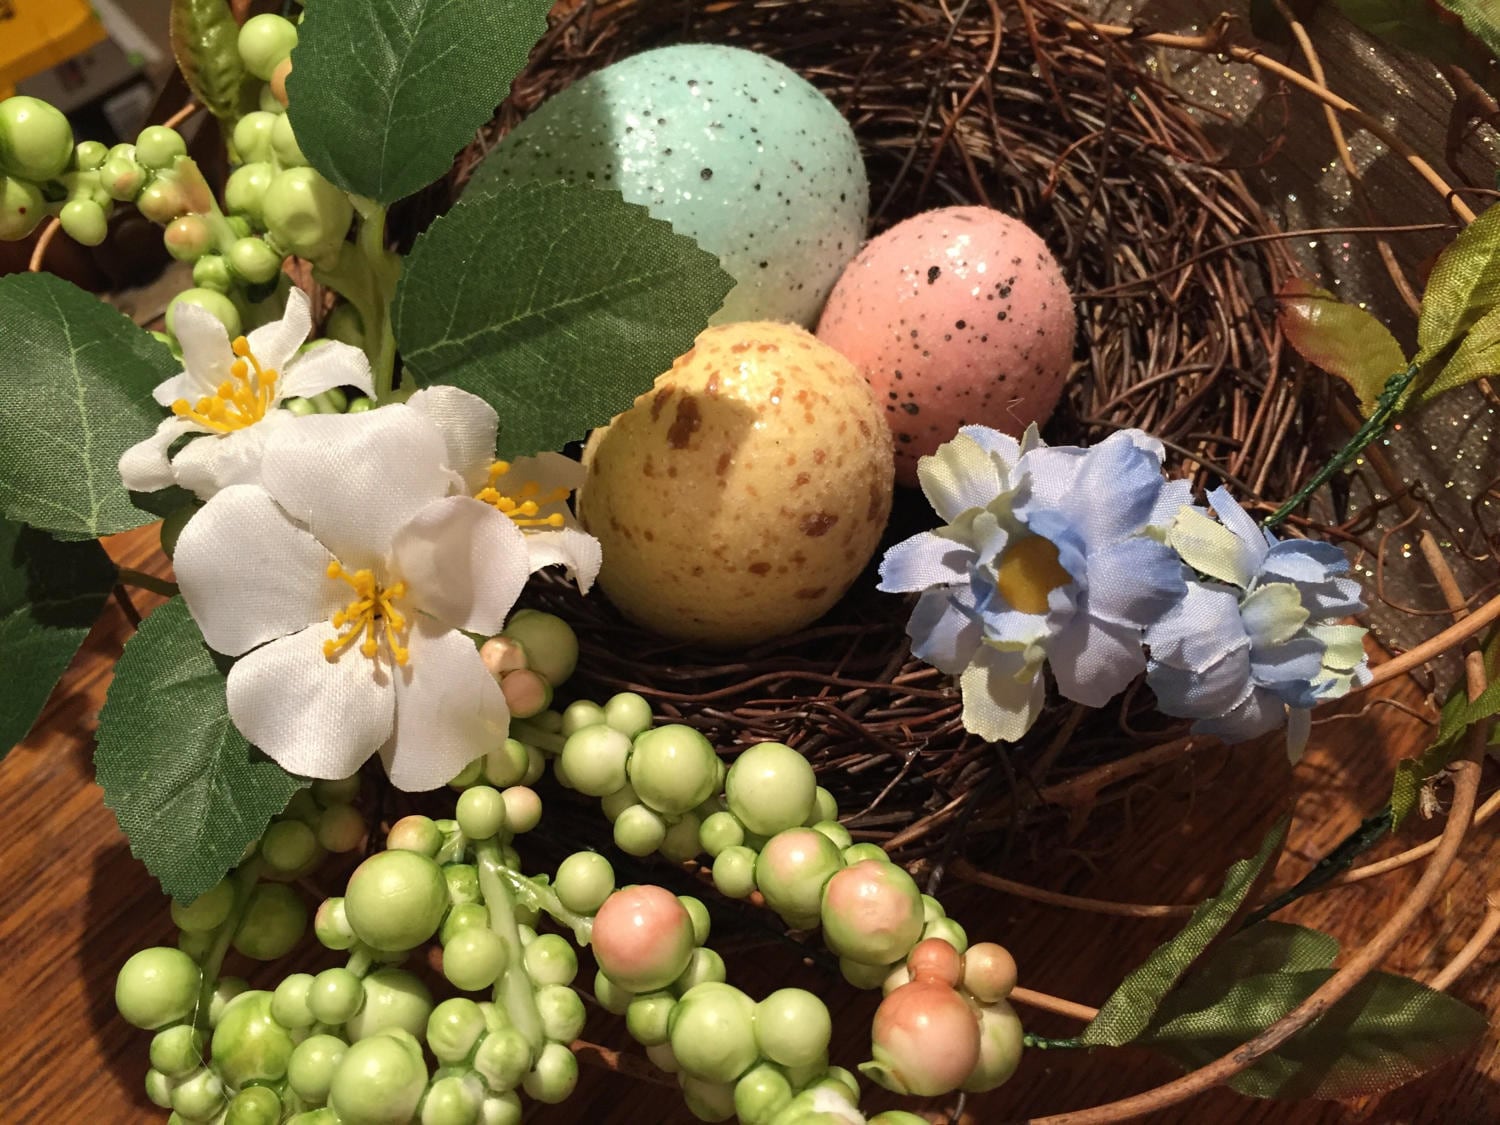 XL 30 BIRDS NESTS ON STEMS BRANCHES Grapevine EASTER SPECKLED EGGS Floral  Decor